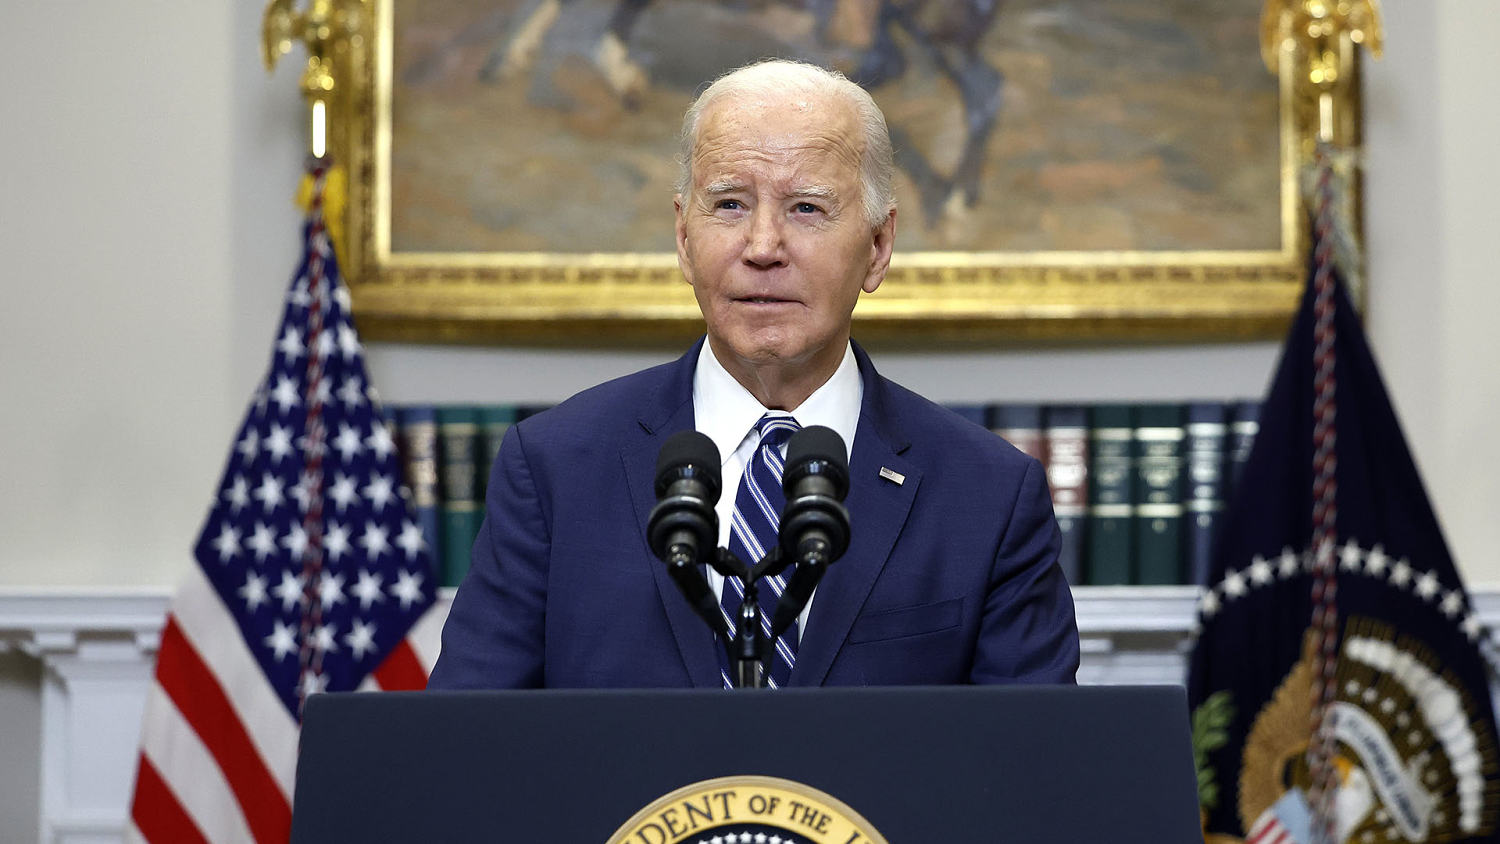 Biden delivers remarks on actions to reduce crime